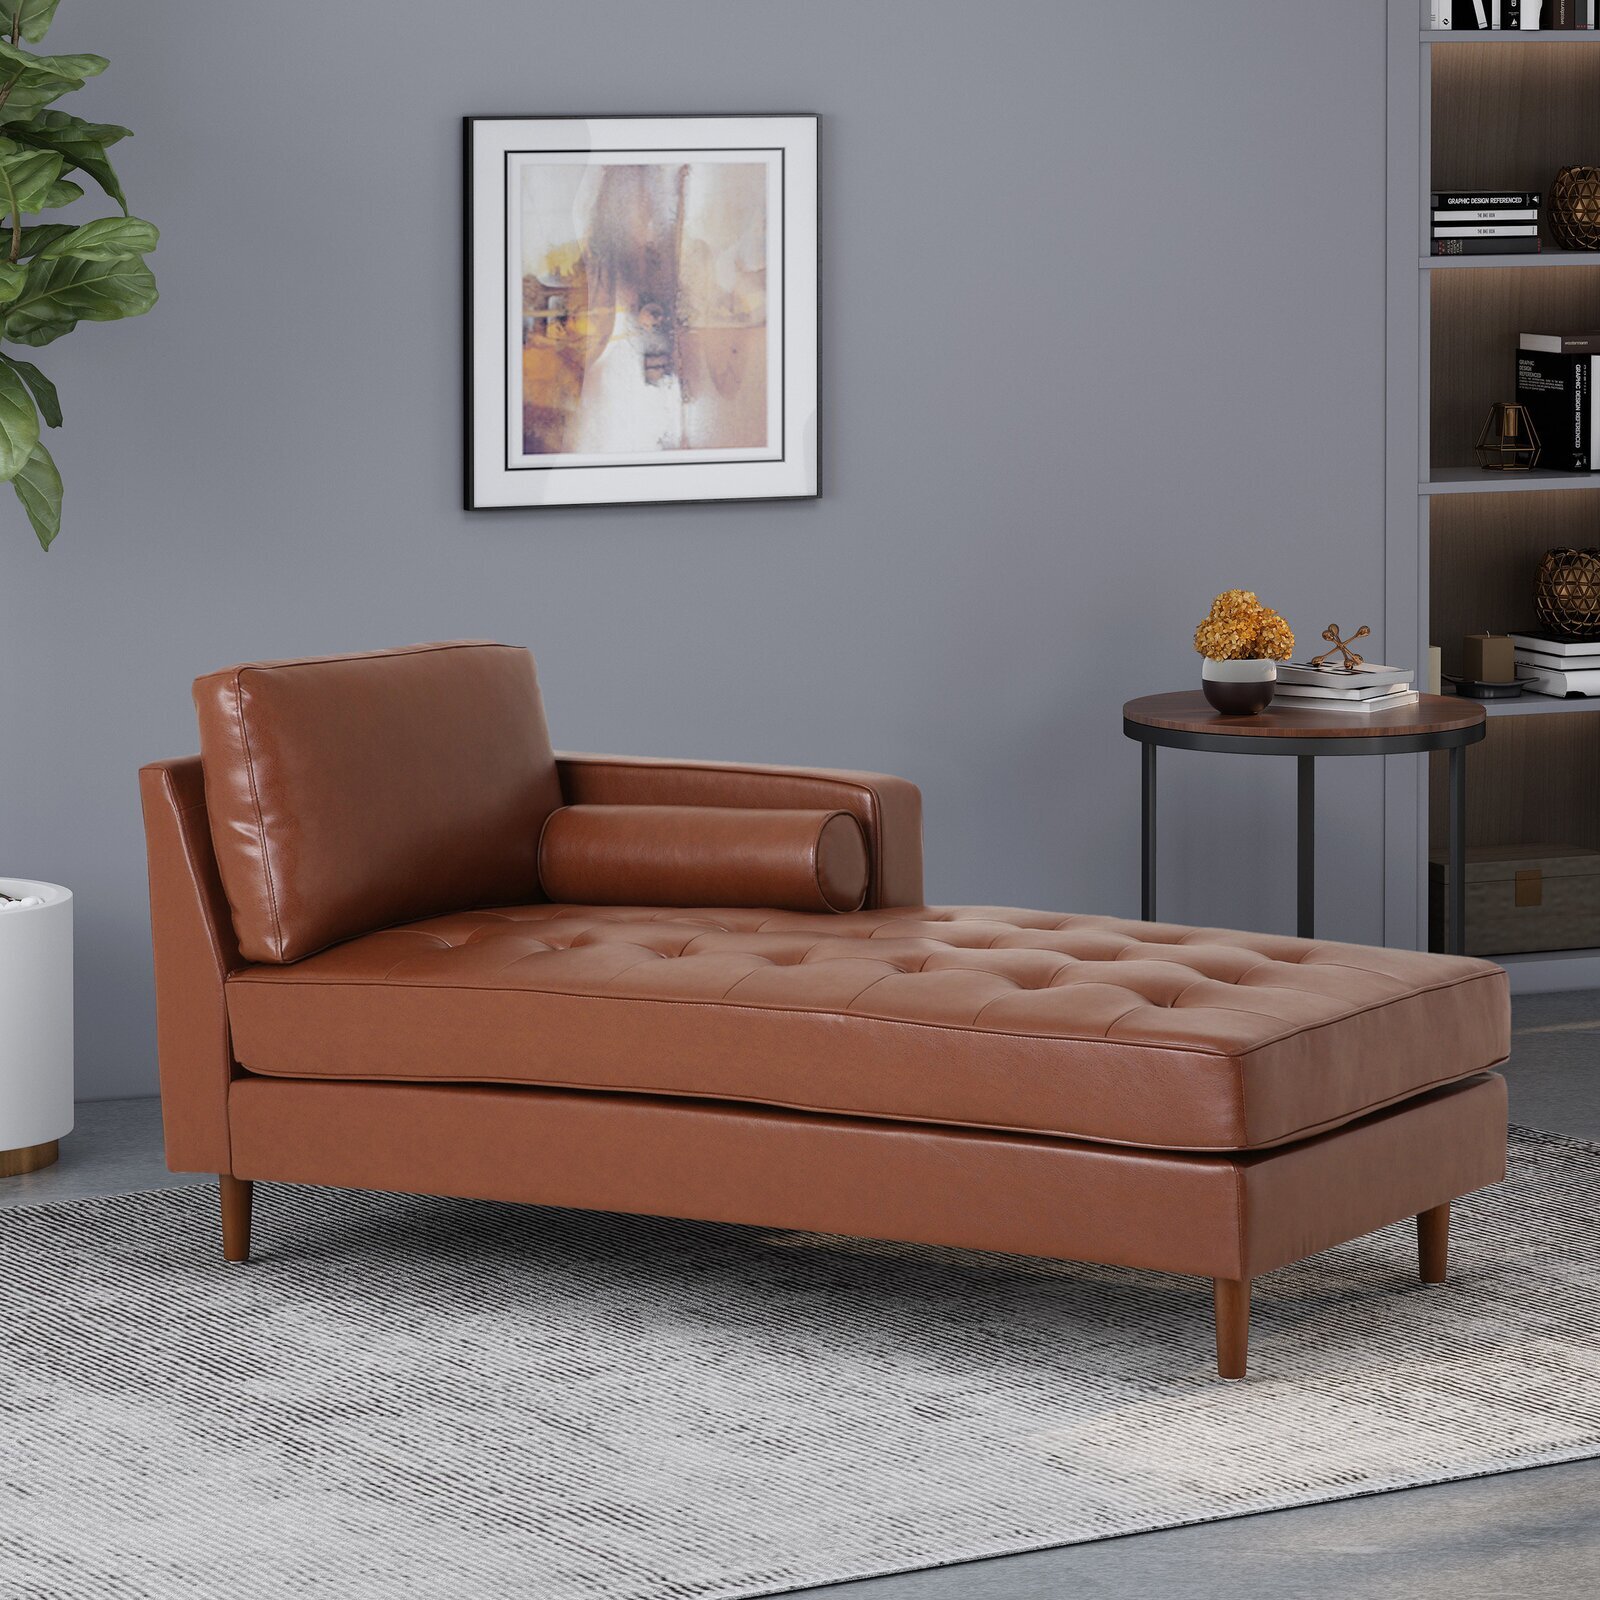 Leather chaise lounge chair with an armrest